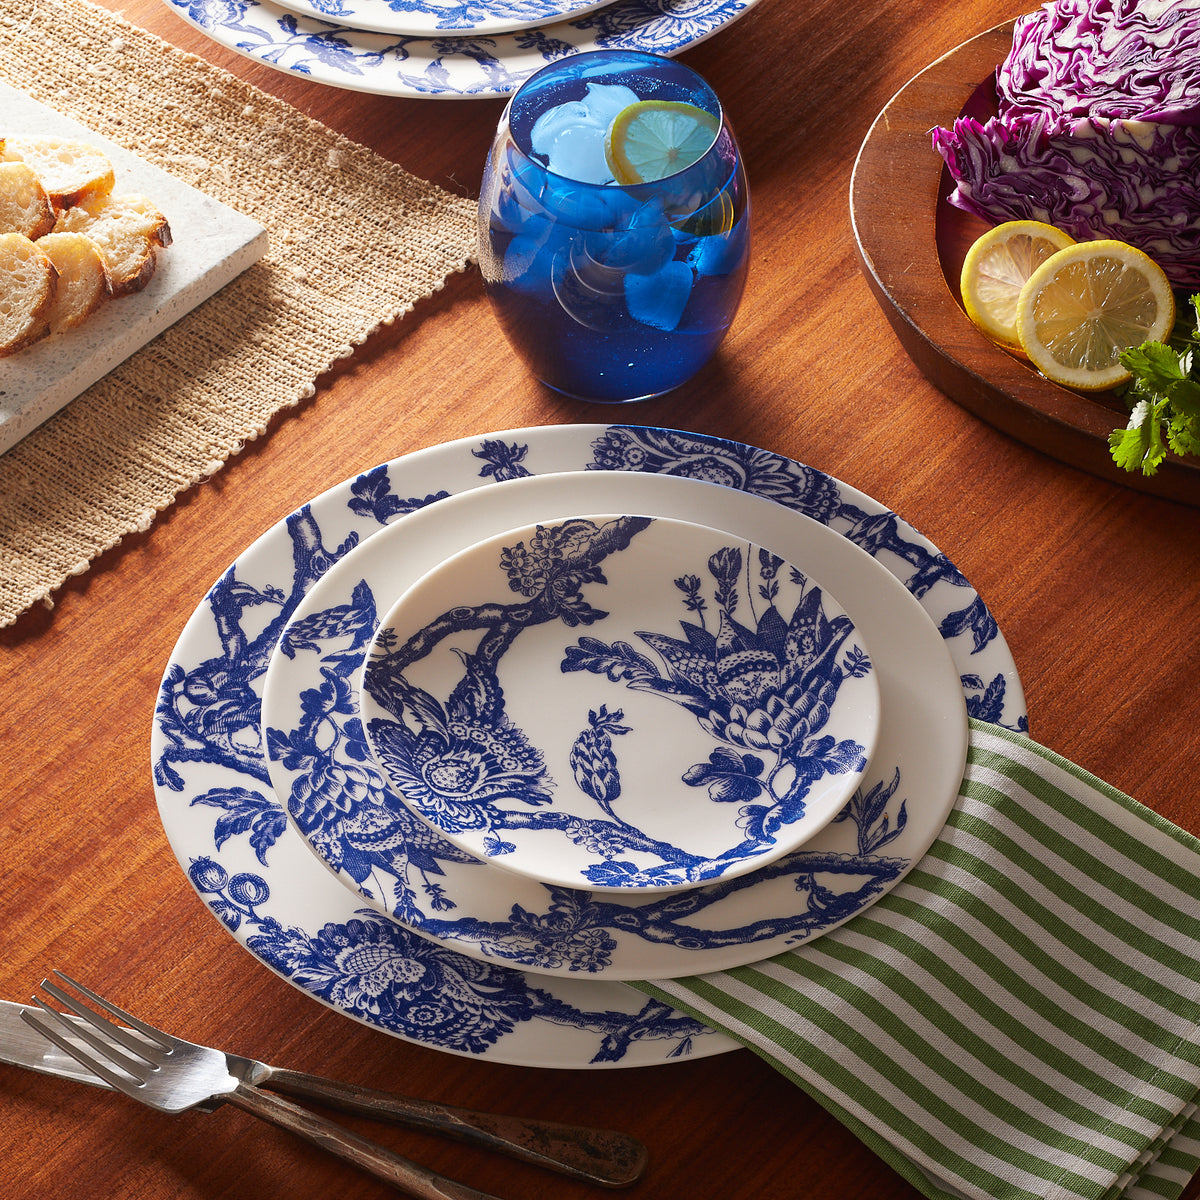 Table setting with Caskata Artisanal Home Arcadia Rimmed Dinner Plate in blue and white floral patterns, a green-striped napkin, a blue glass, sliced bread, and a bowl containing purple cabbage, lemon slices, and herbs on a wooden table.